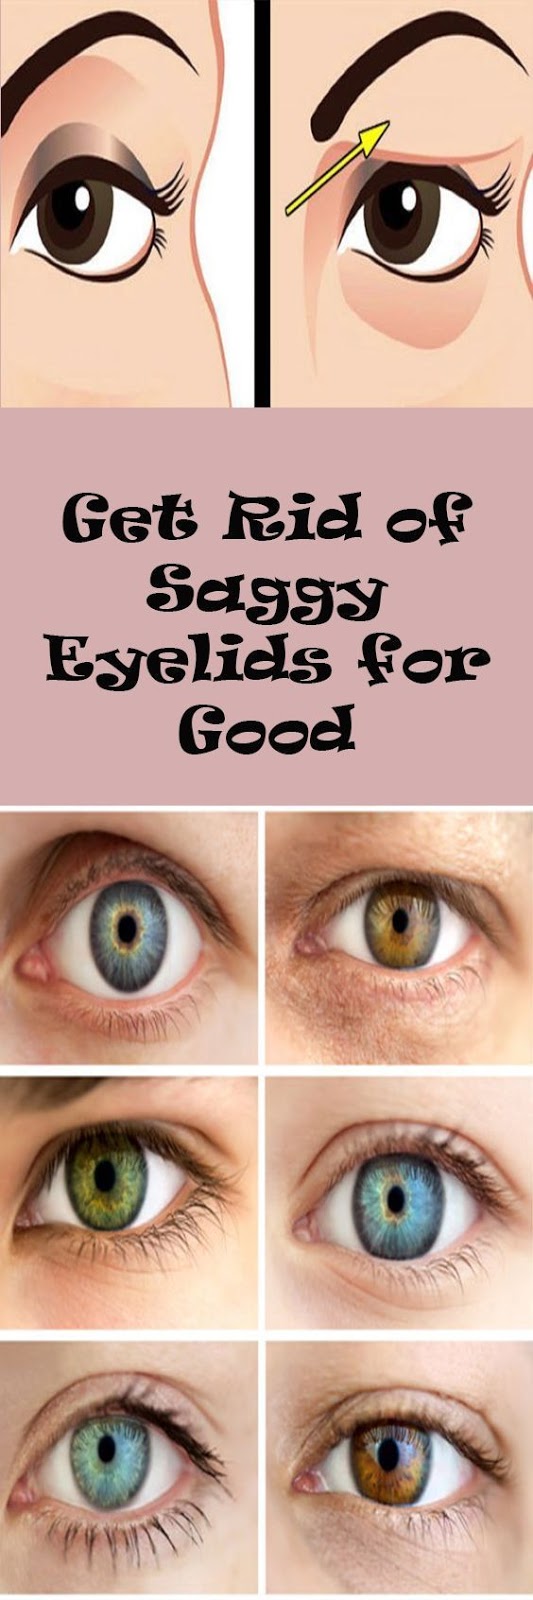 what is good for sagging eyes